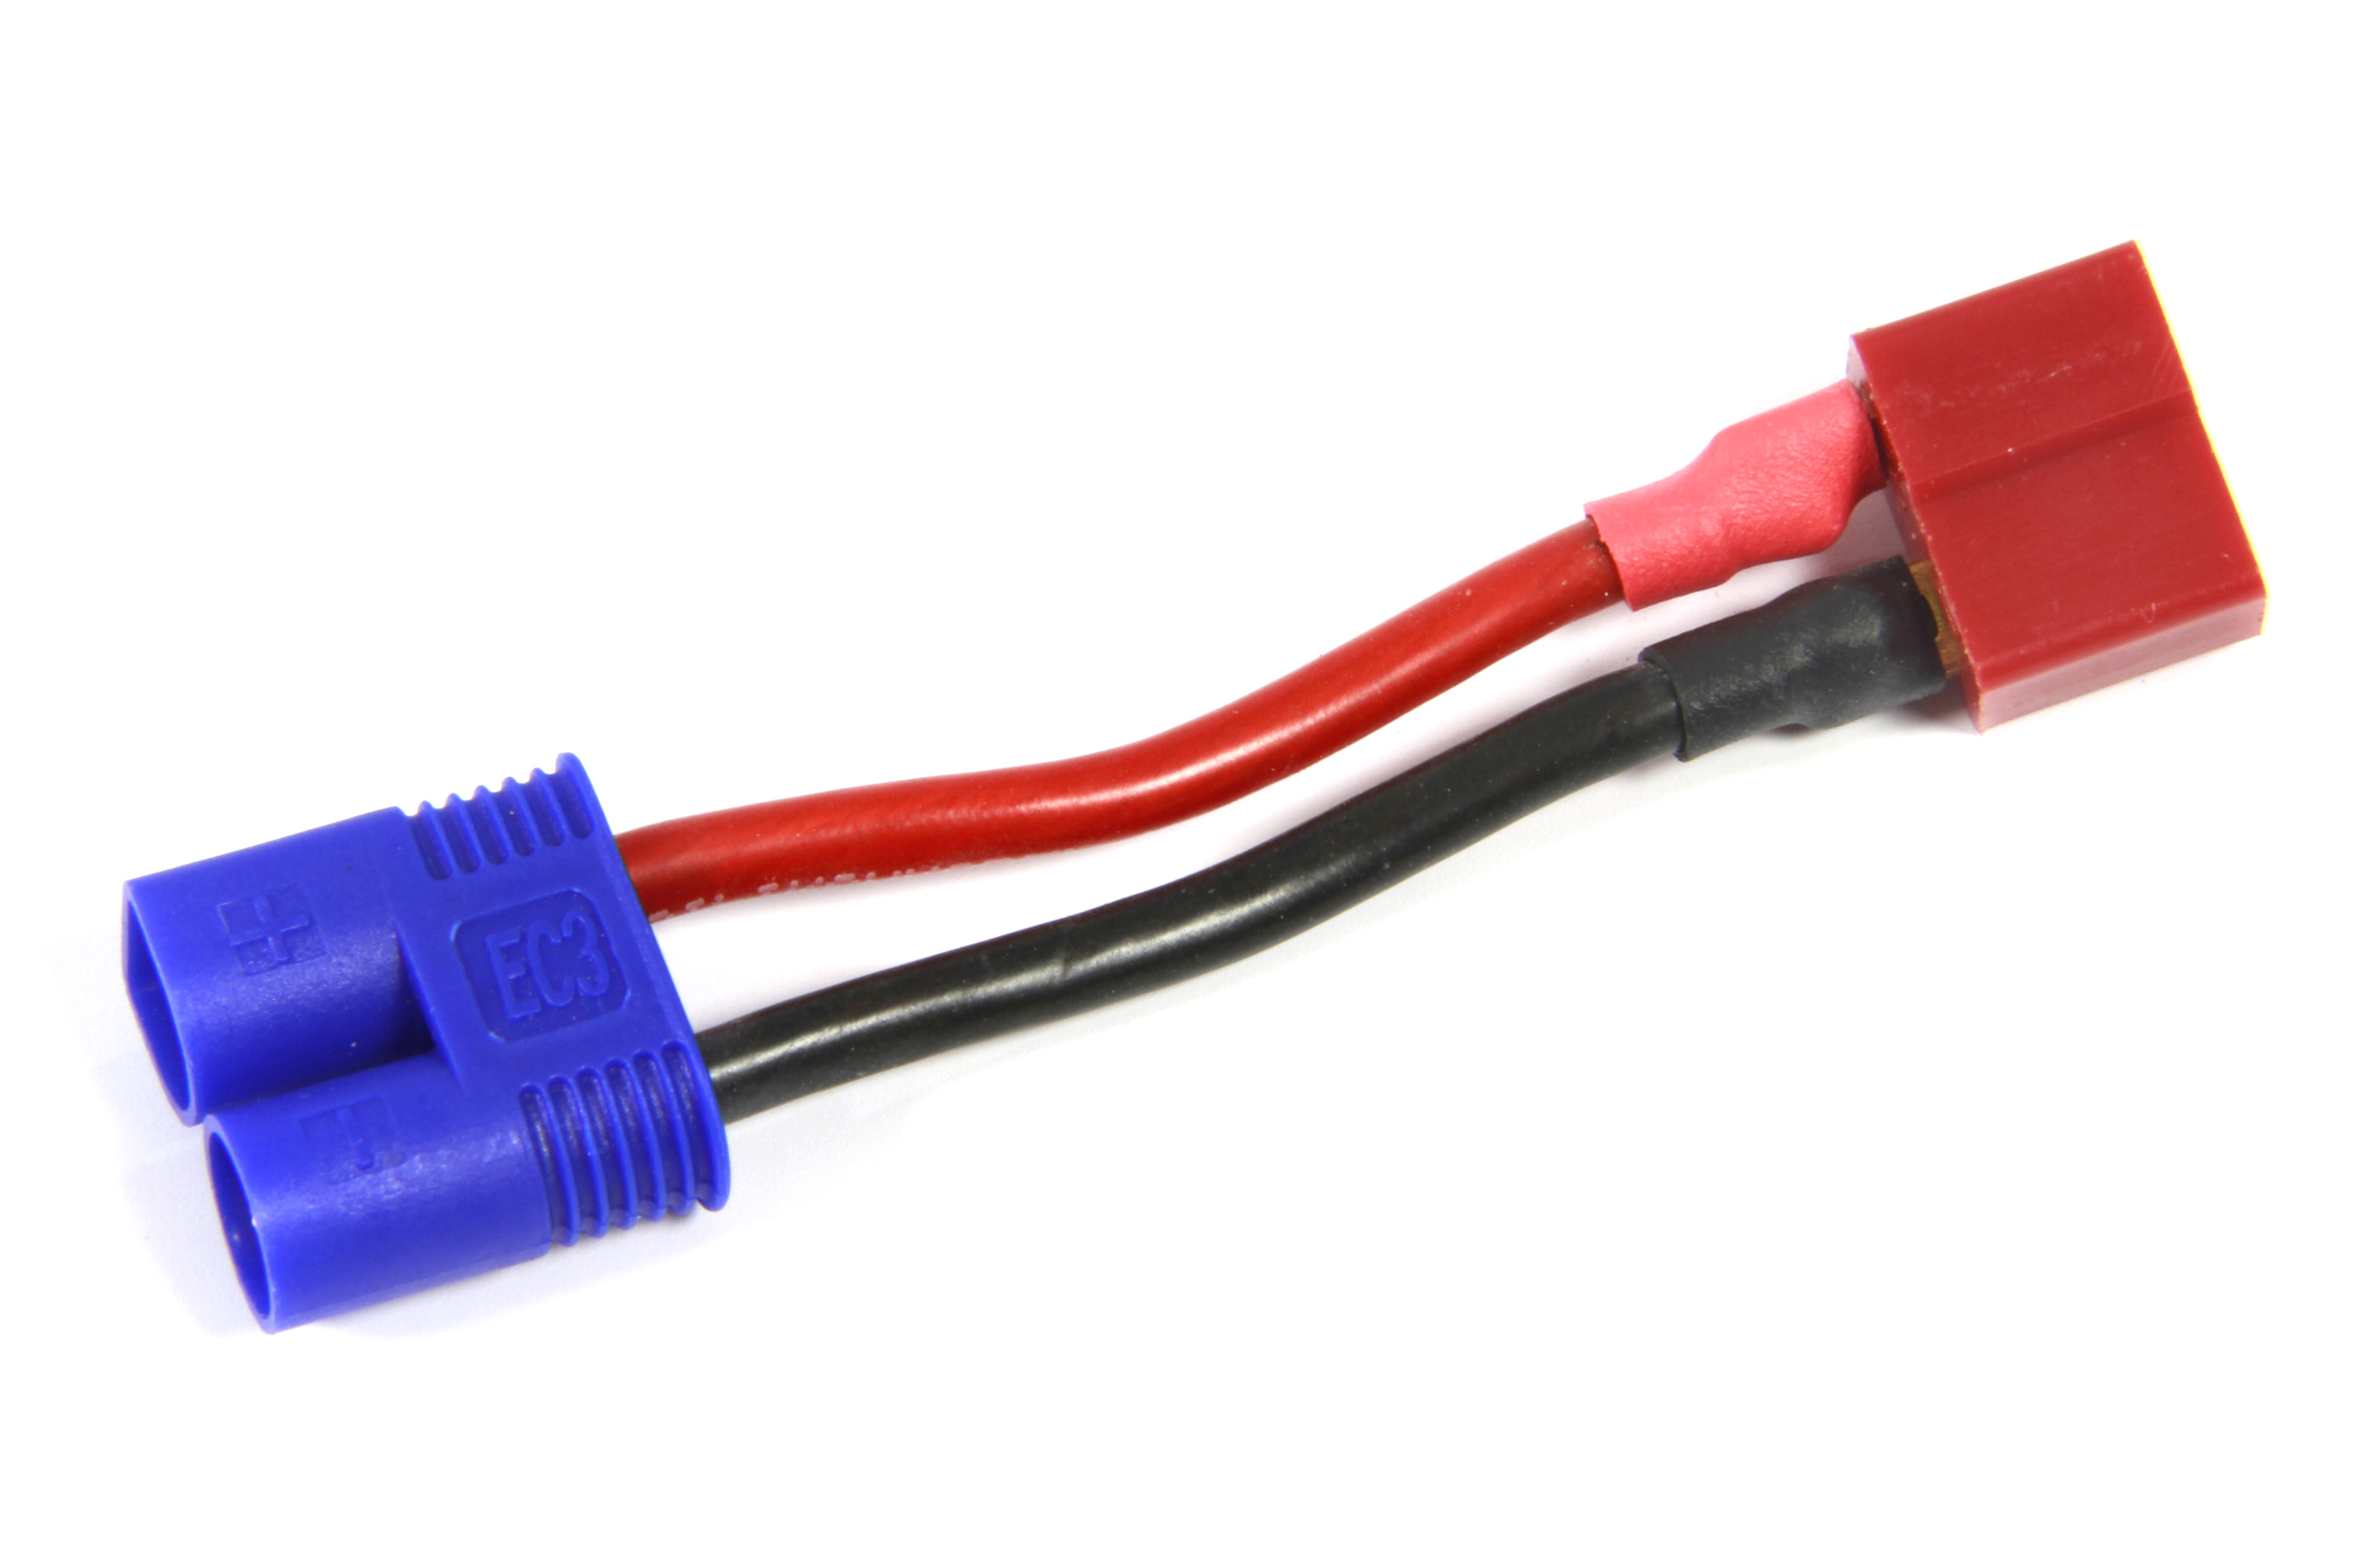 y1303/02 EC3 to female T-connector adapter cable